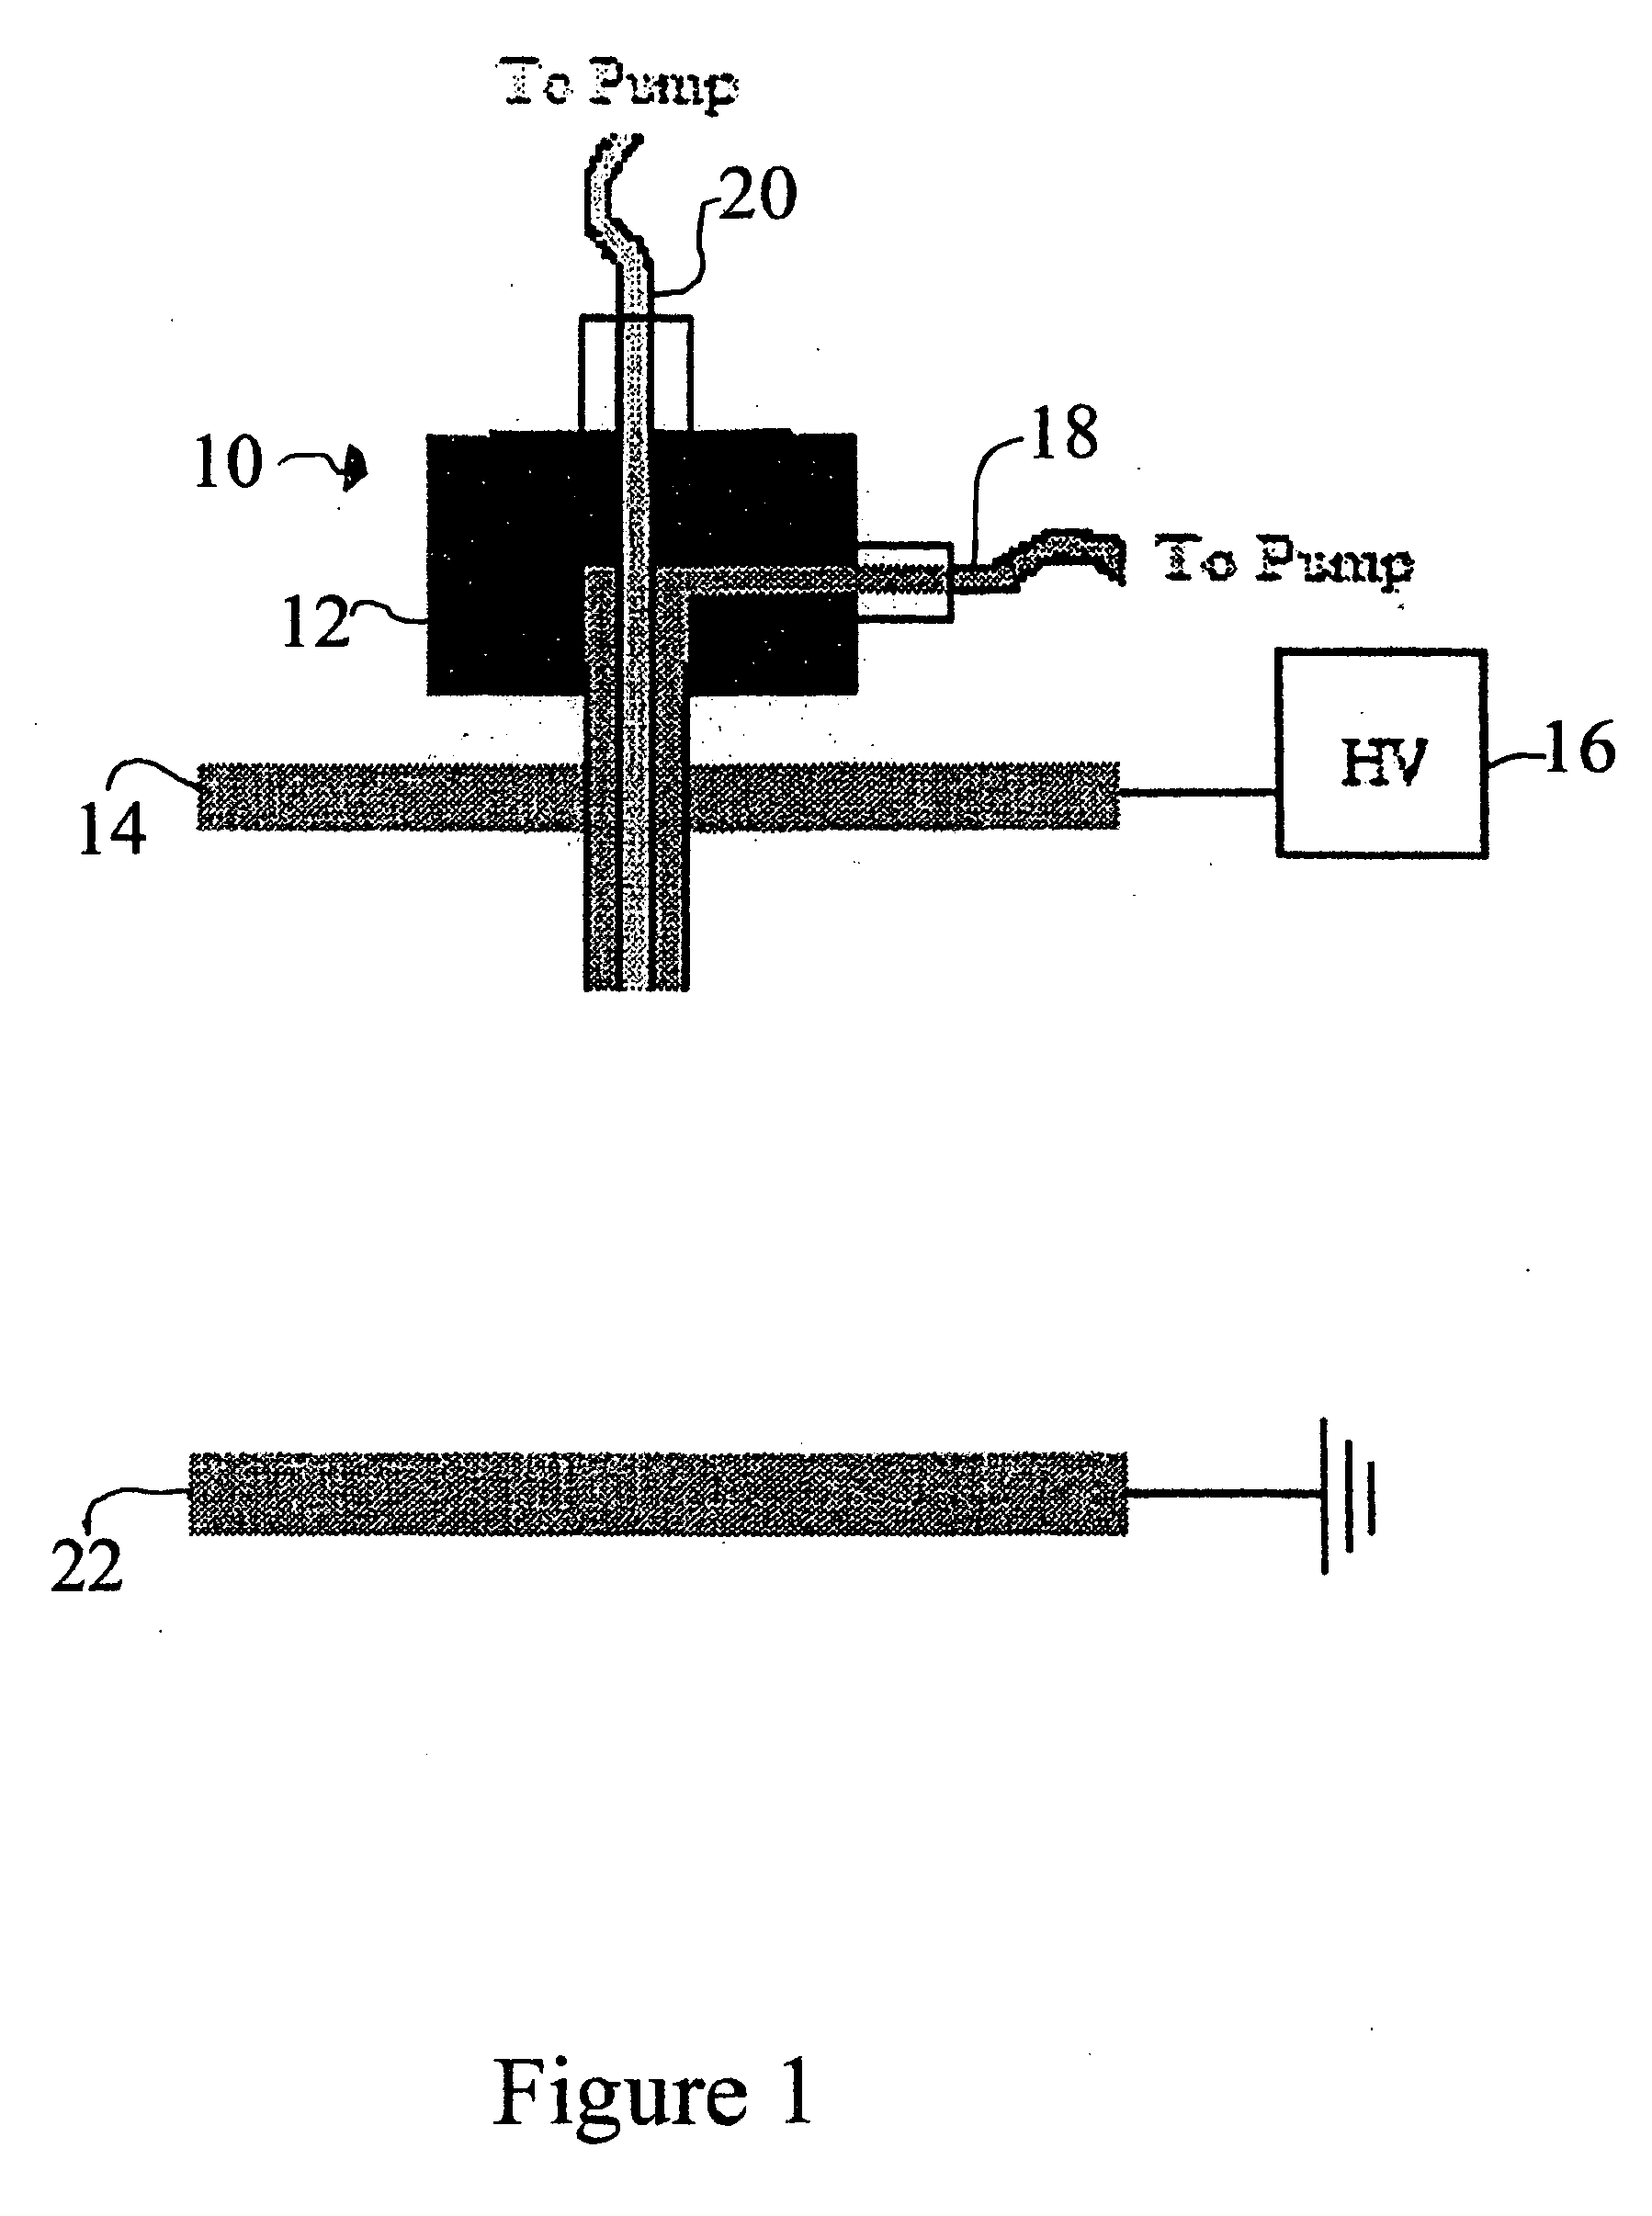 Production of submicron diameter fibers by two-fluid electrospinning process